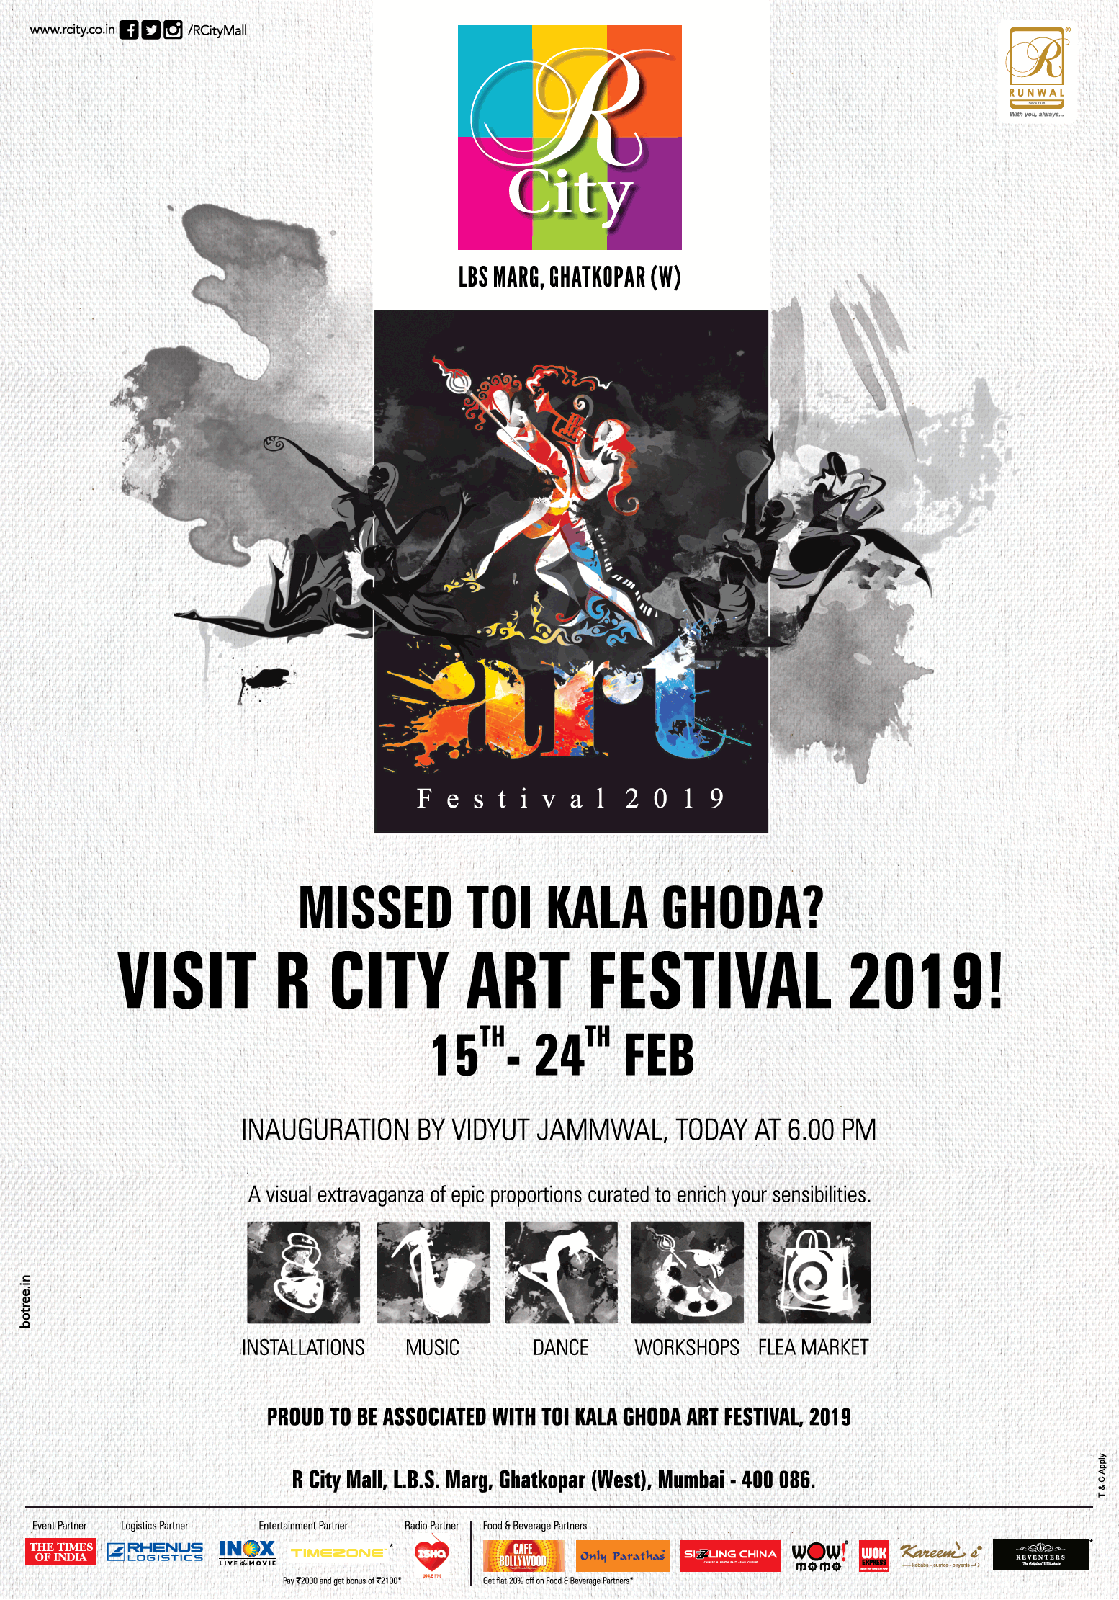 r-city-visit-r-city-art-festival-2019-15th-to-24th-feb-ad-bombay-times-15-02-2019.png